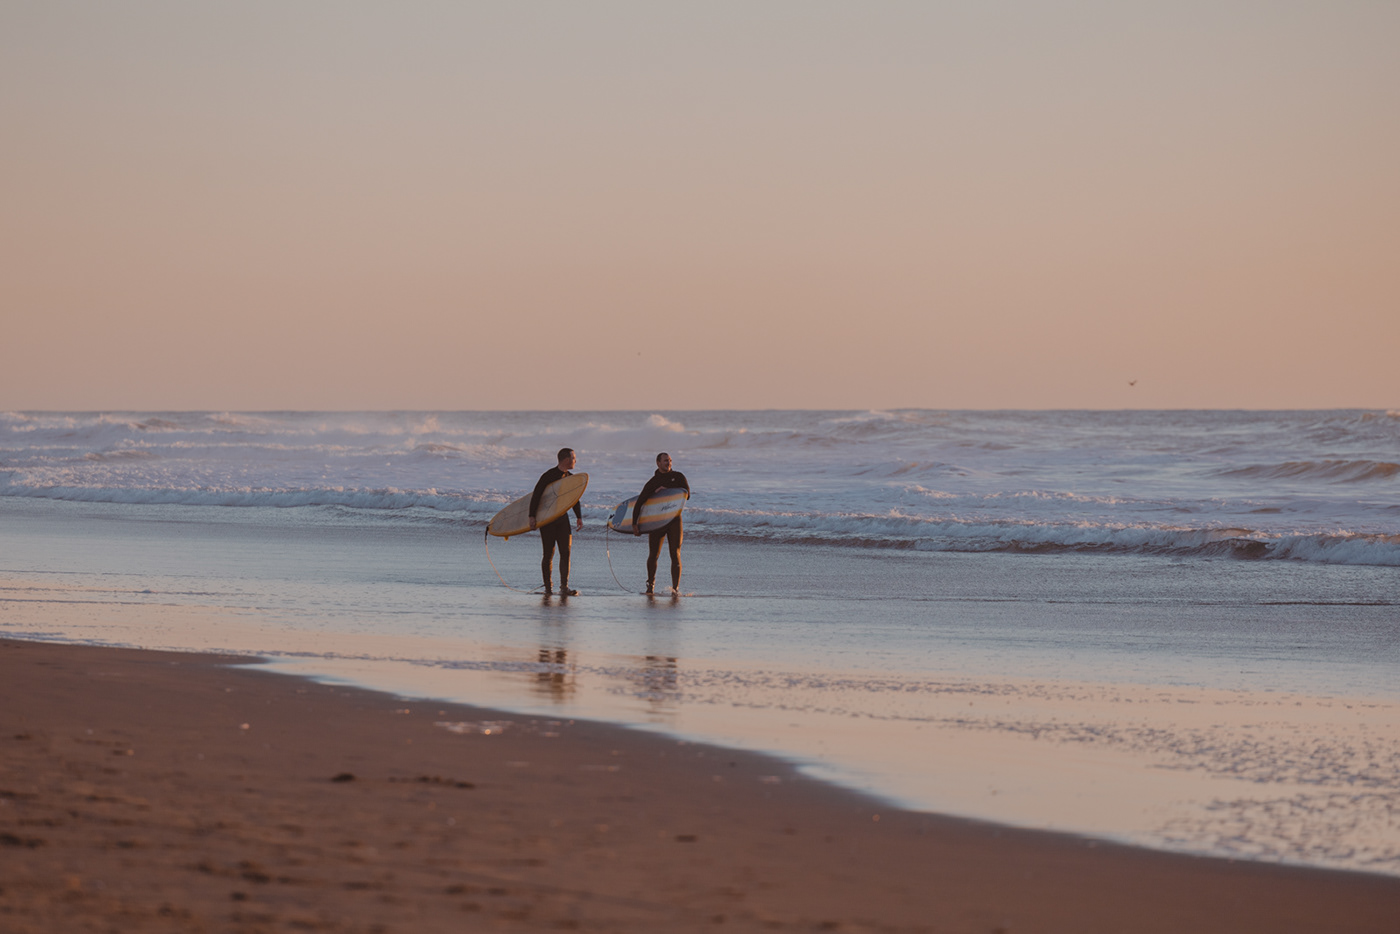 men surfing at the beach (California) by Kathy Gomez Photography